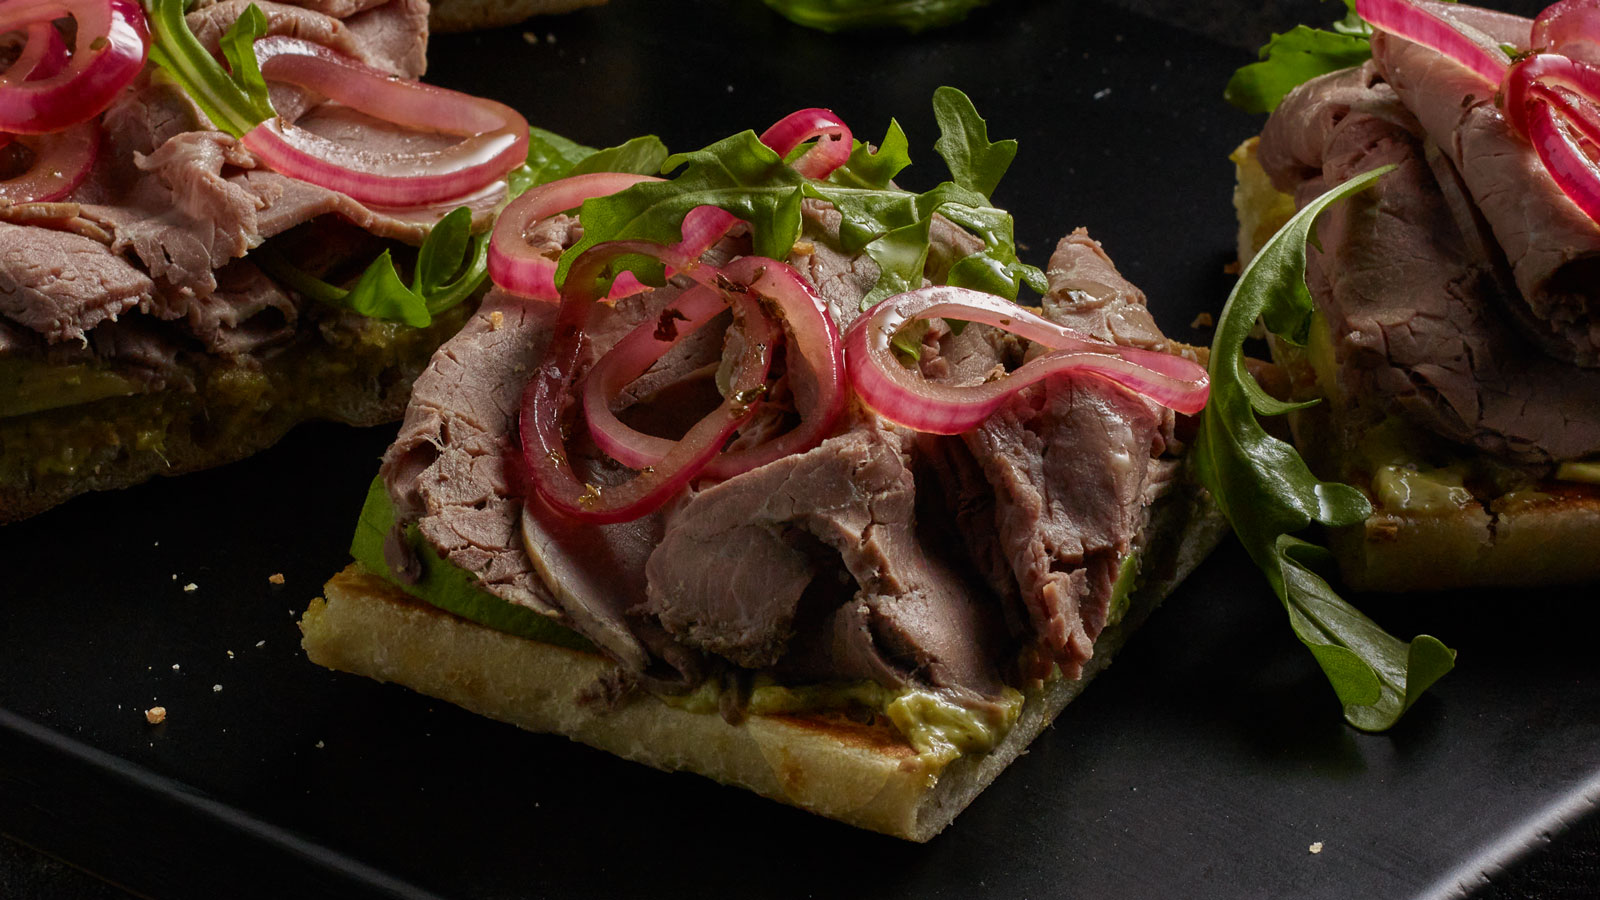 The Ultimate Steak Sandwich with Arugula and Pesto - Our Salty Kitchen